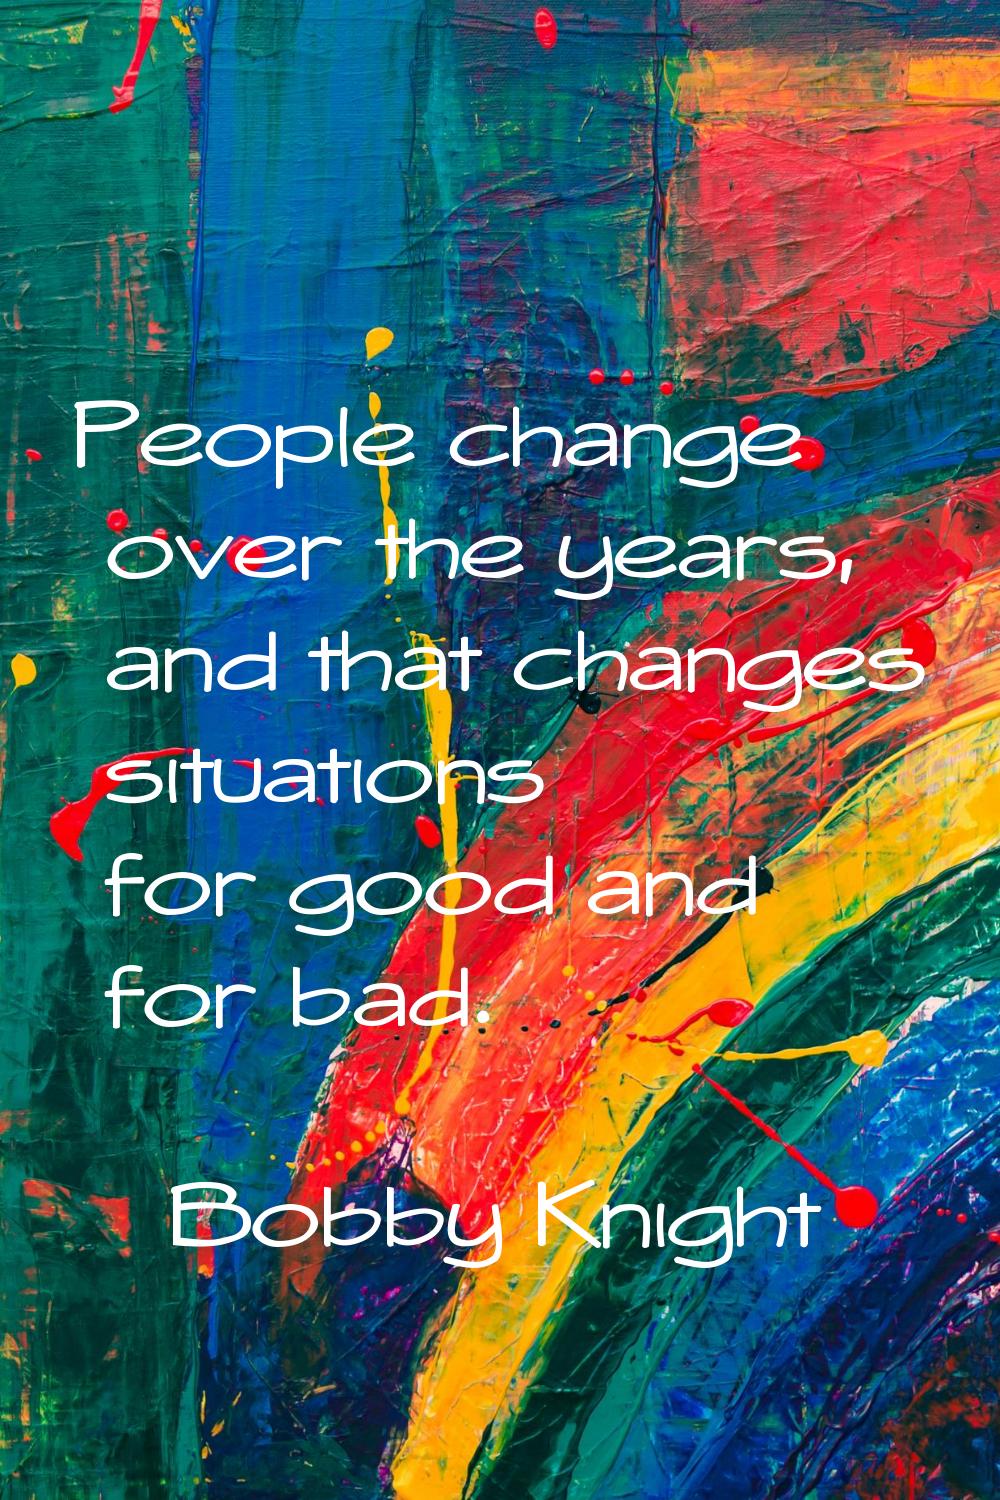 People change over the years, and that changes situations for good and for bad.